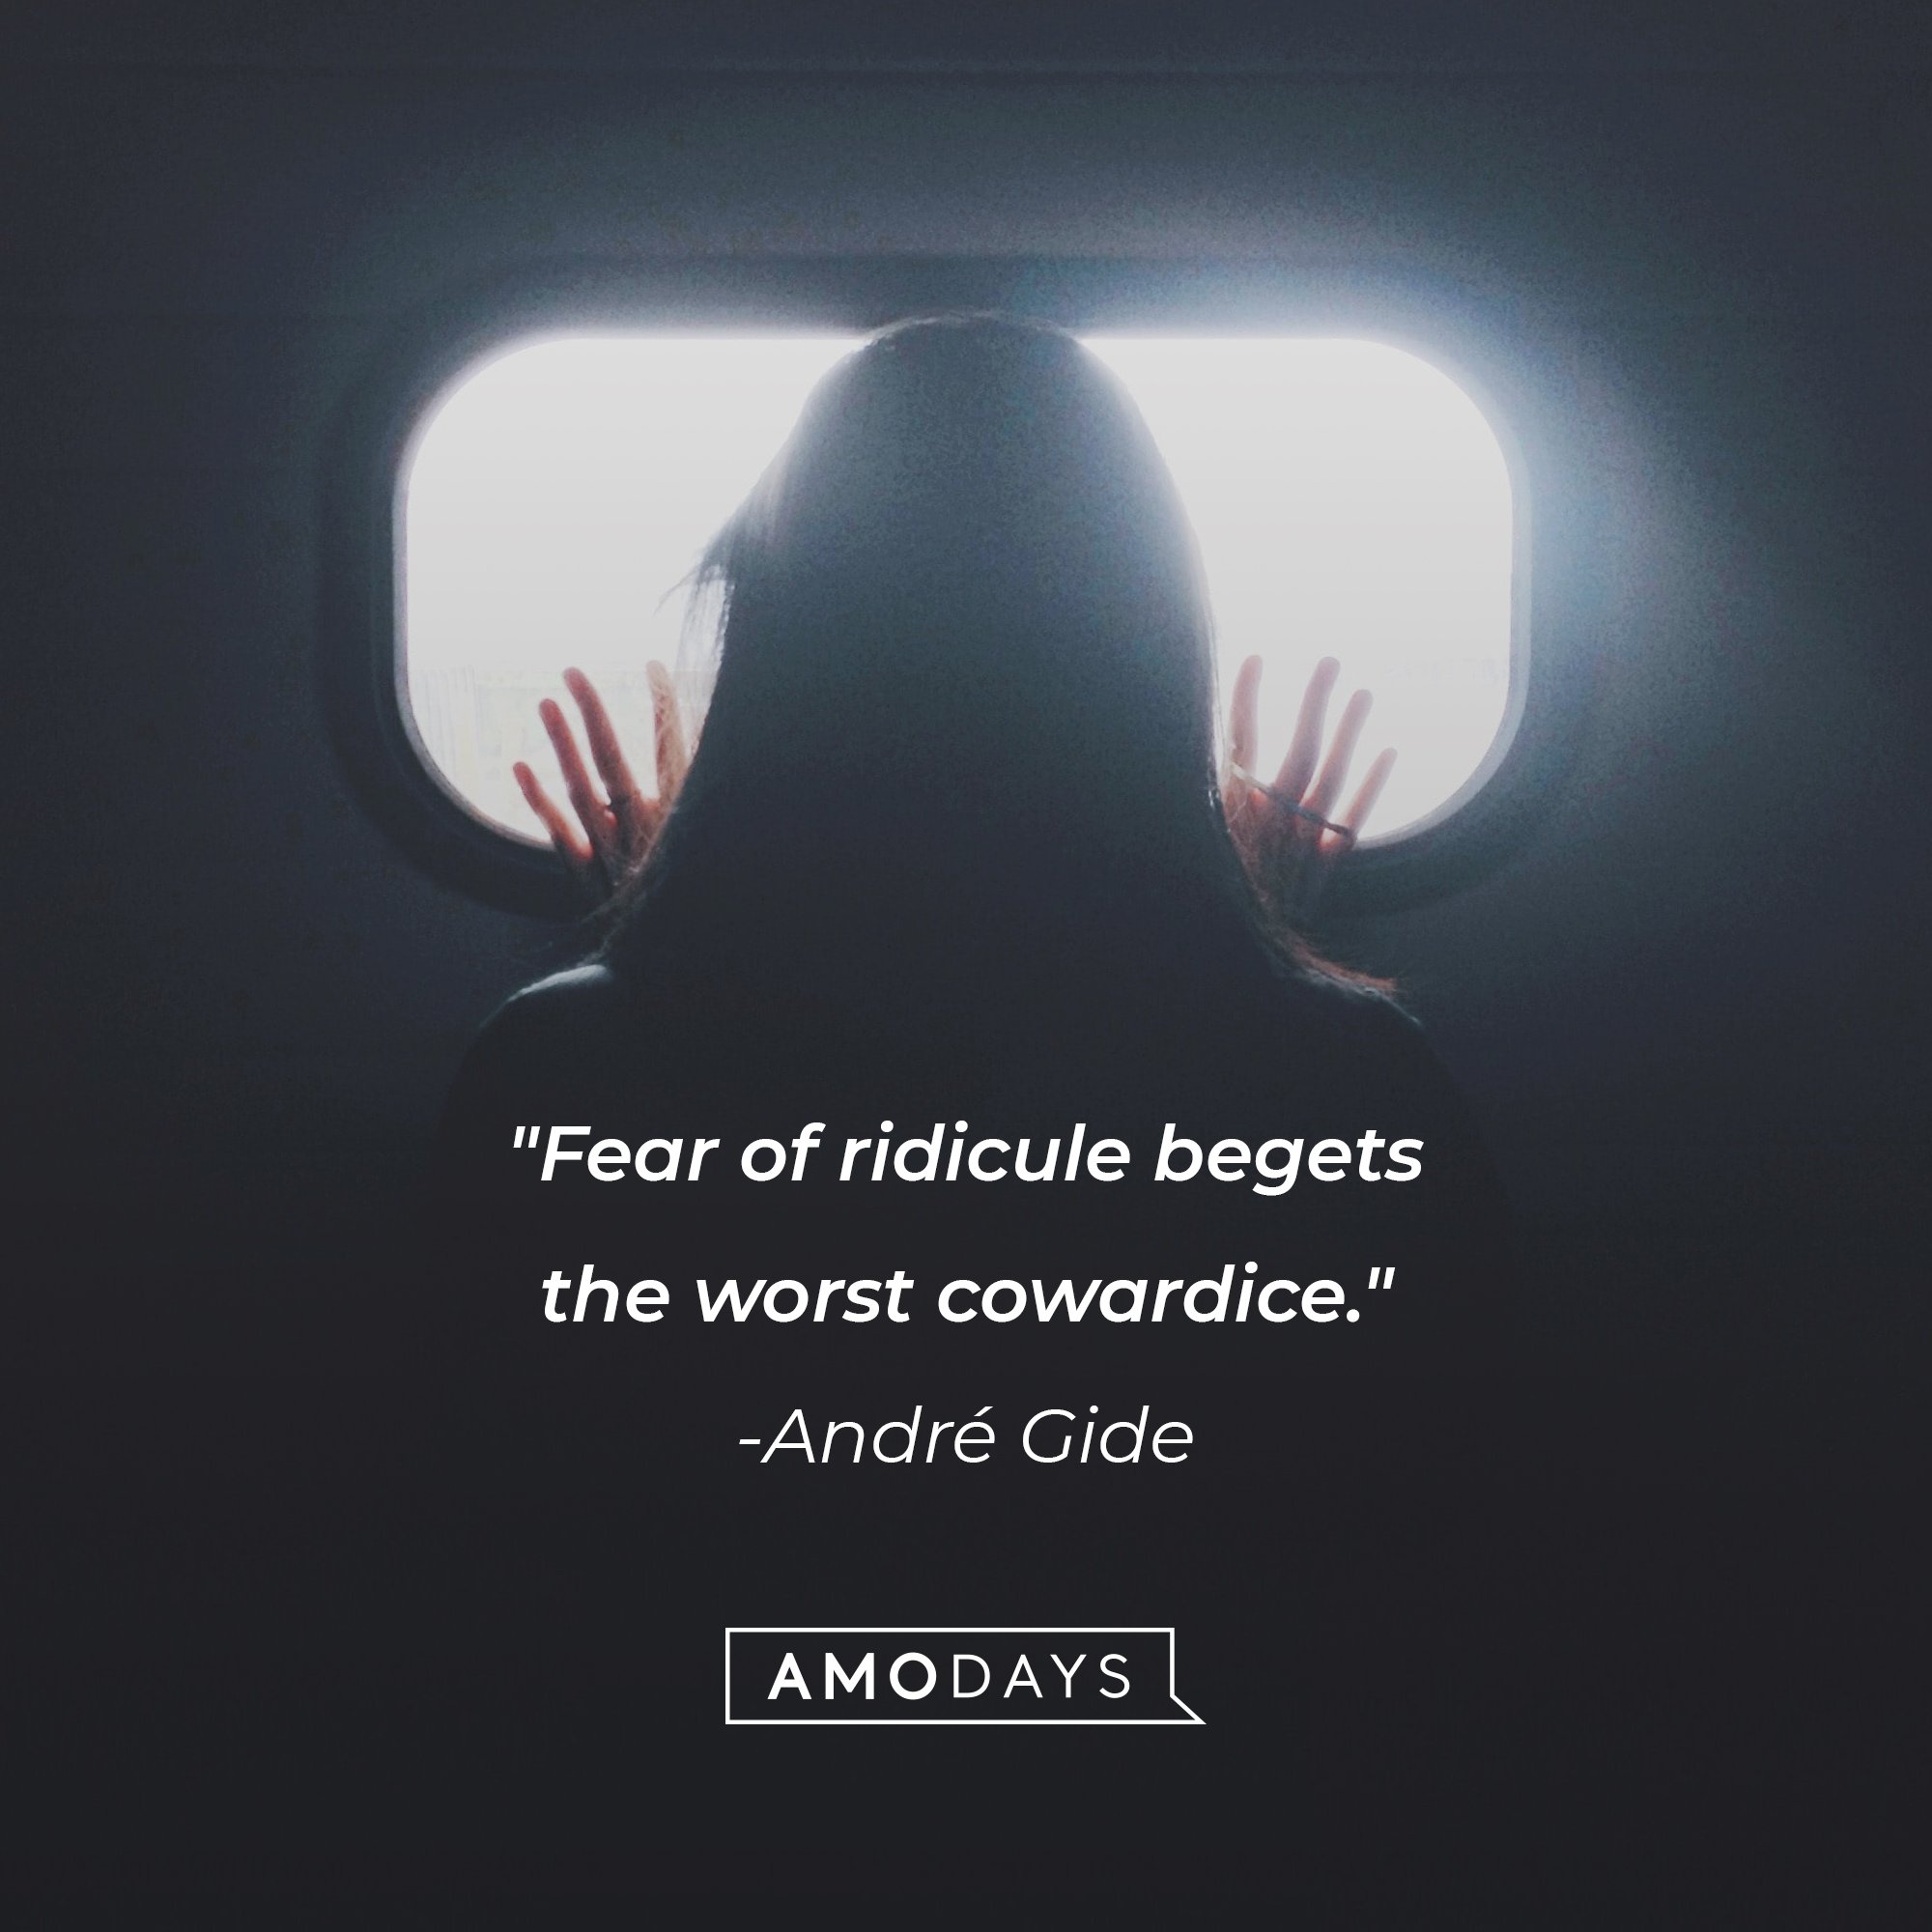 André Gide’s quote: "Fear of ridicule begets the worst cowardice." | Image: AmoDays